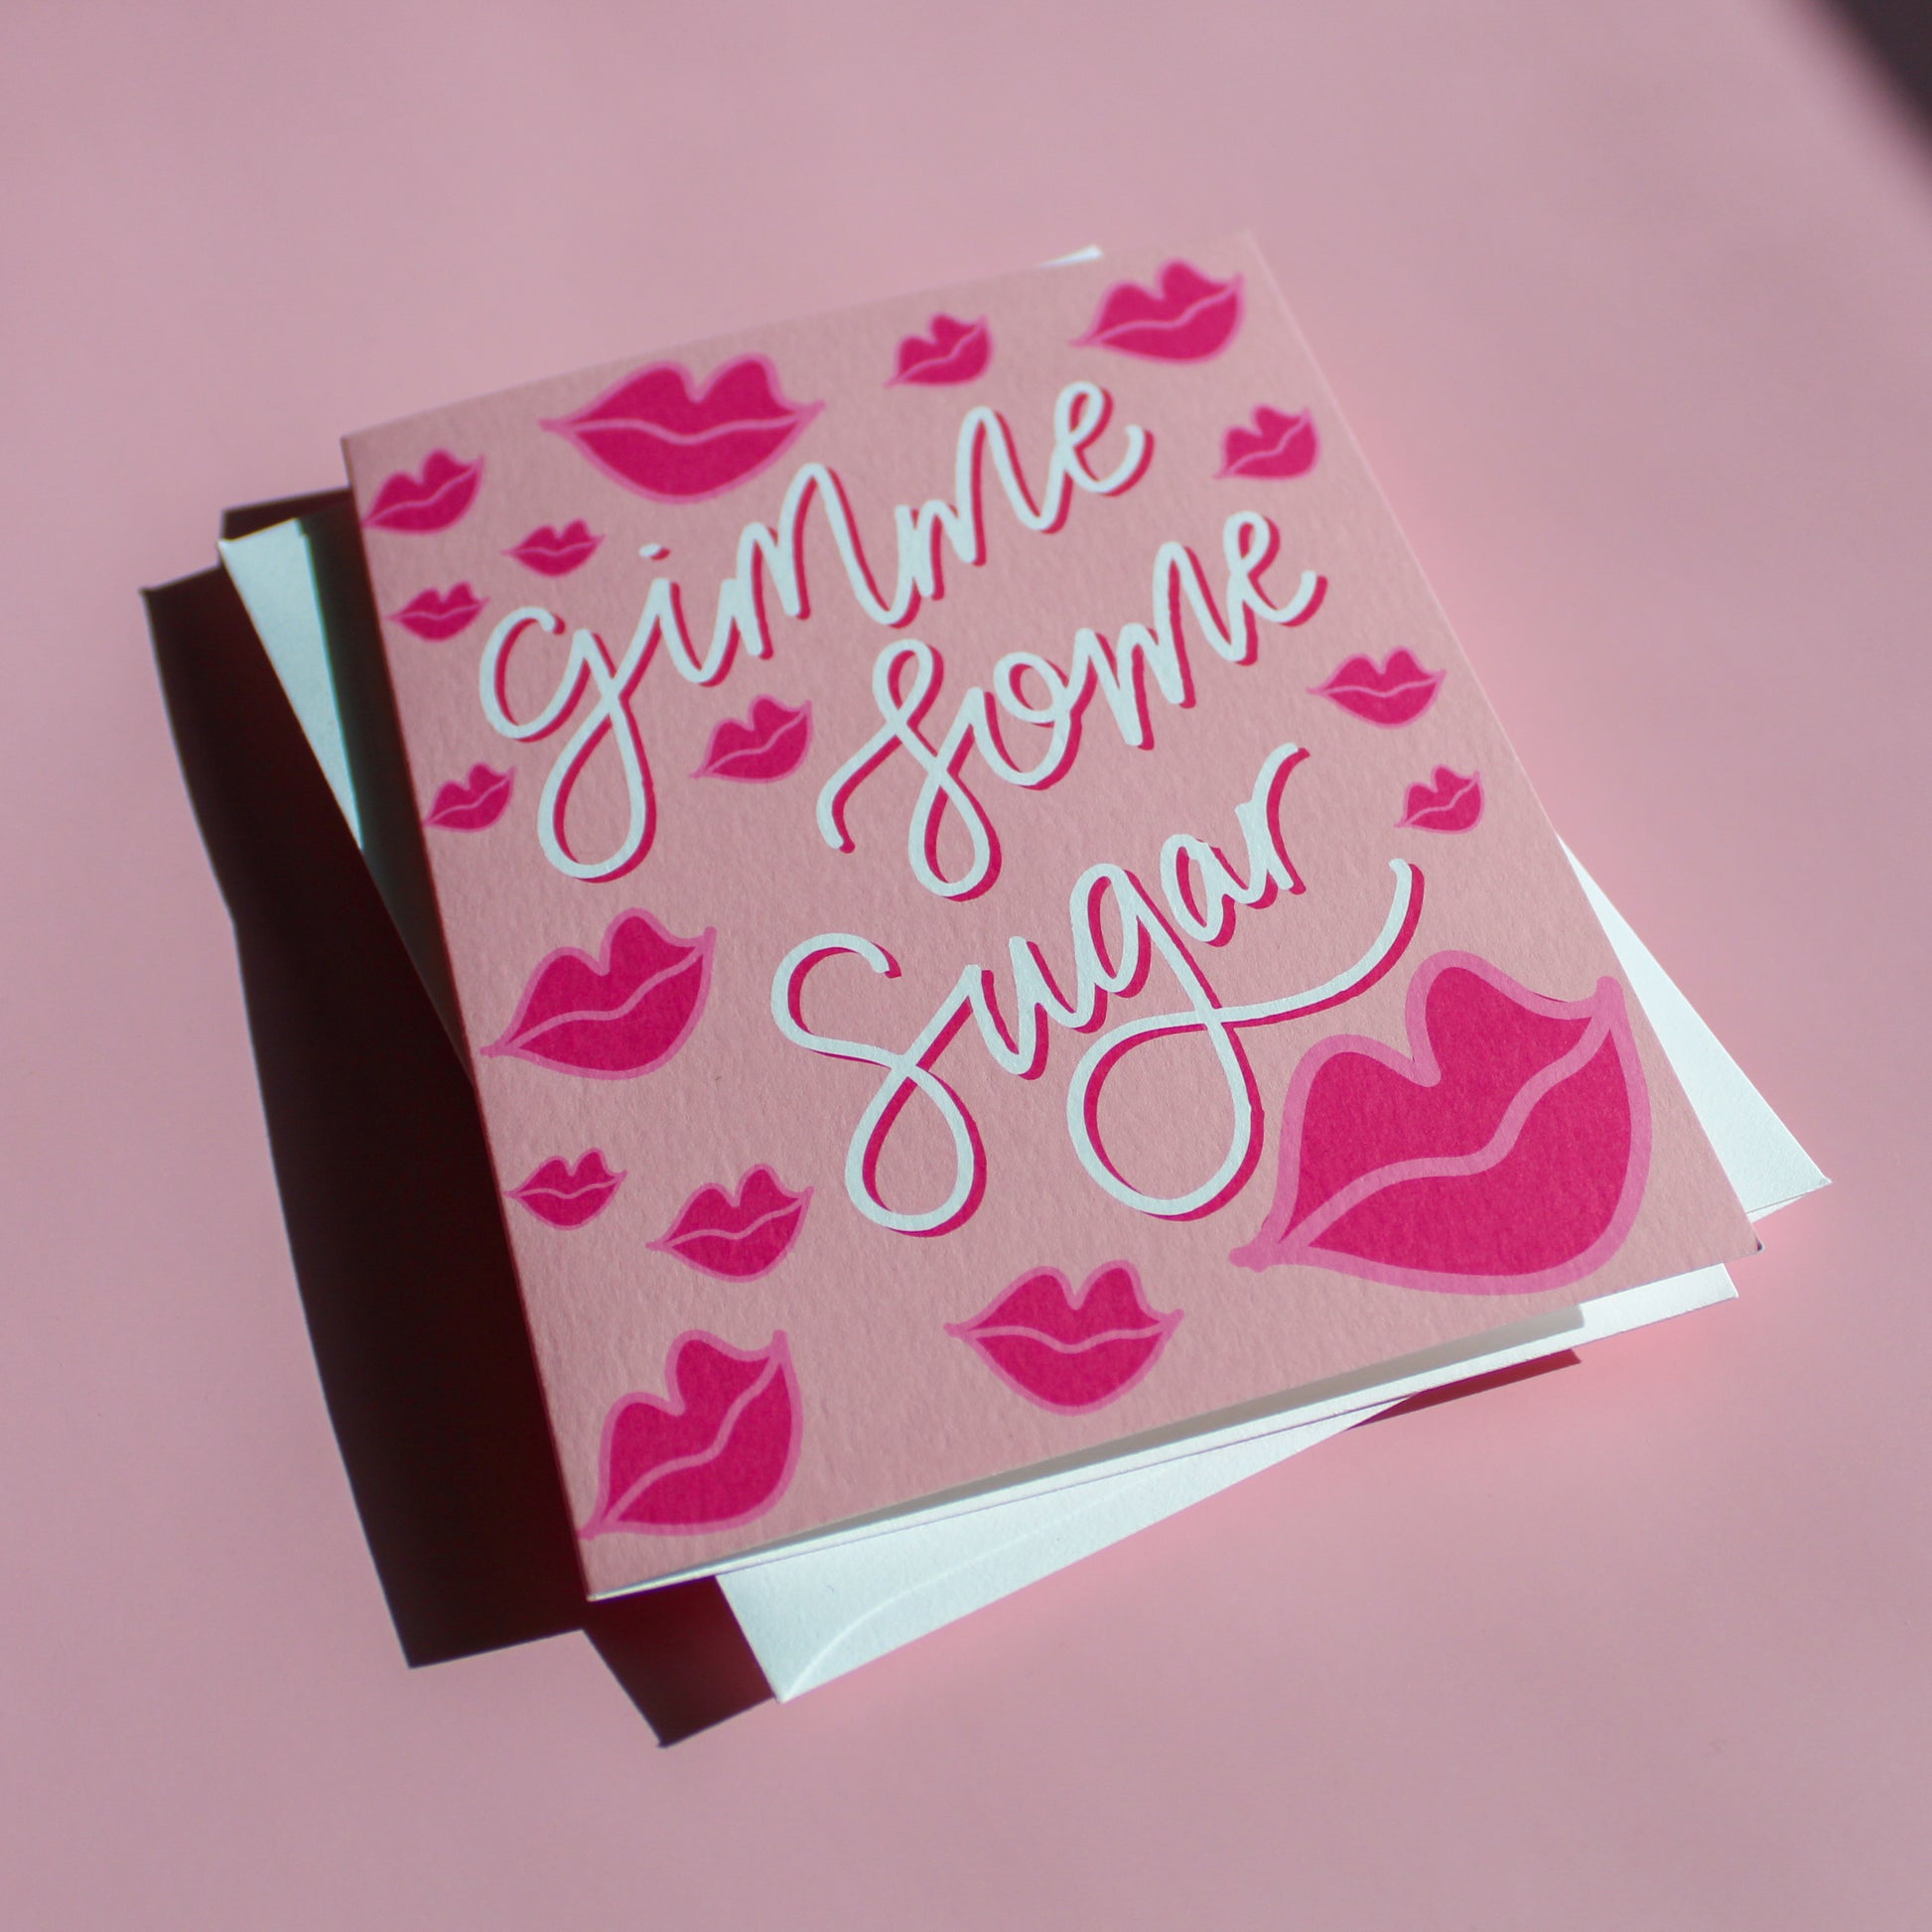 Our "Gimme Some Sugar" Valentine's Day card features hand drawn kissy lips on a pink background - it is perfect for a kid or adult! Each card is folded to 4.25" tall by 5.5" wide, is blank inside and comes with a matching white envelope. Cards are packaged in cellophane sleeves.